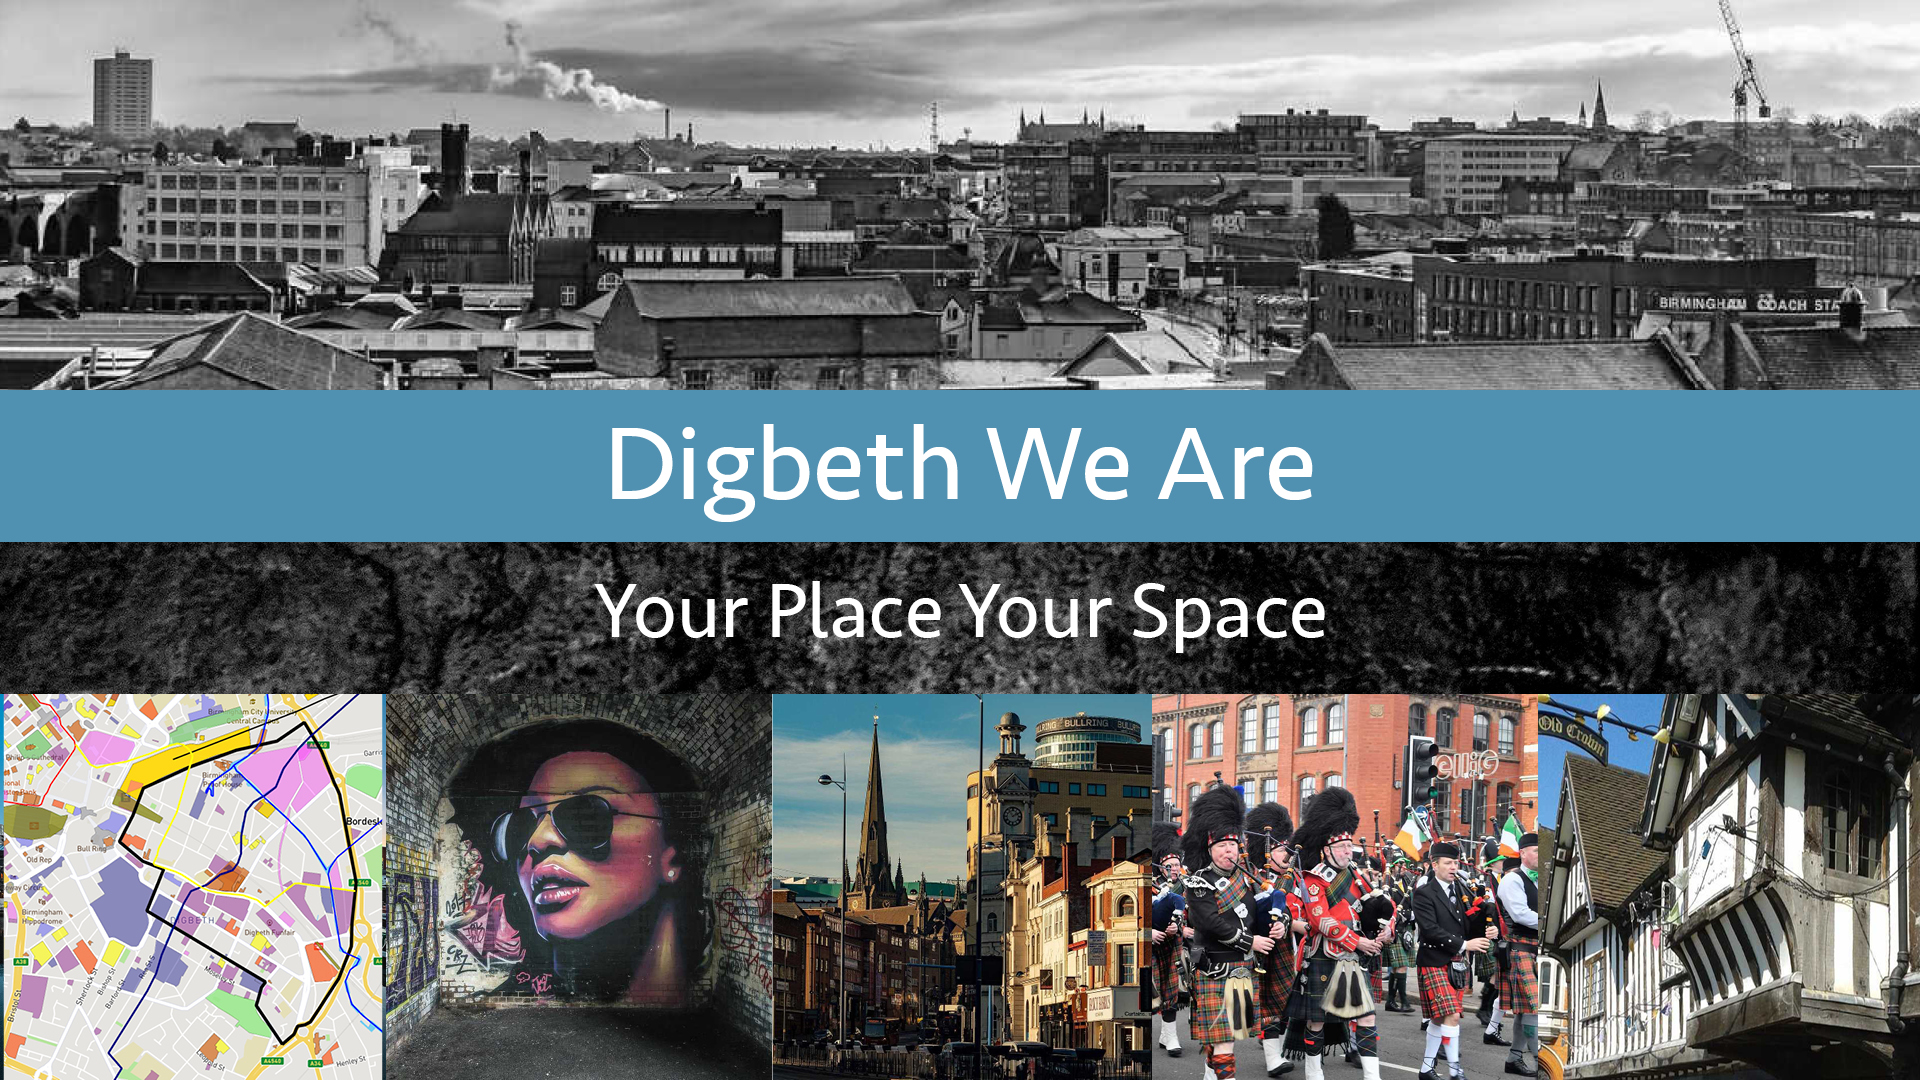 Digbeth+We+Are+-+Engaging%2c+involving+and+inspiring+community!